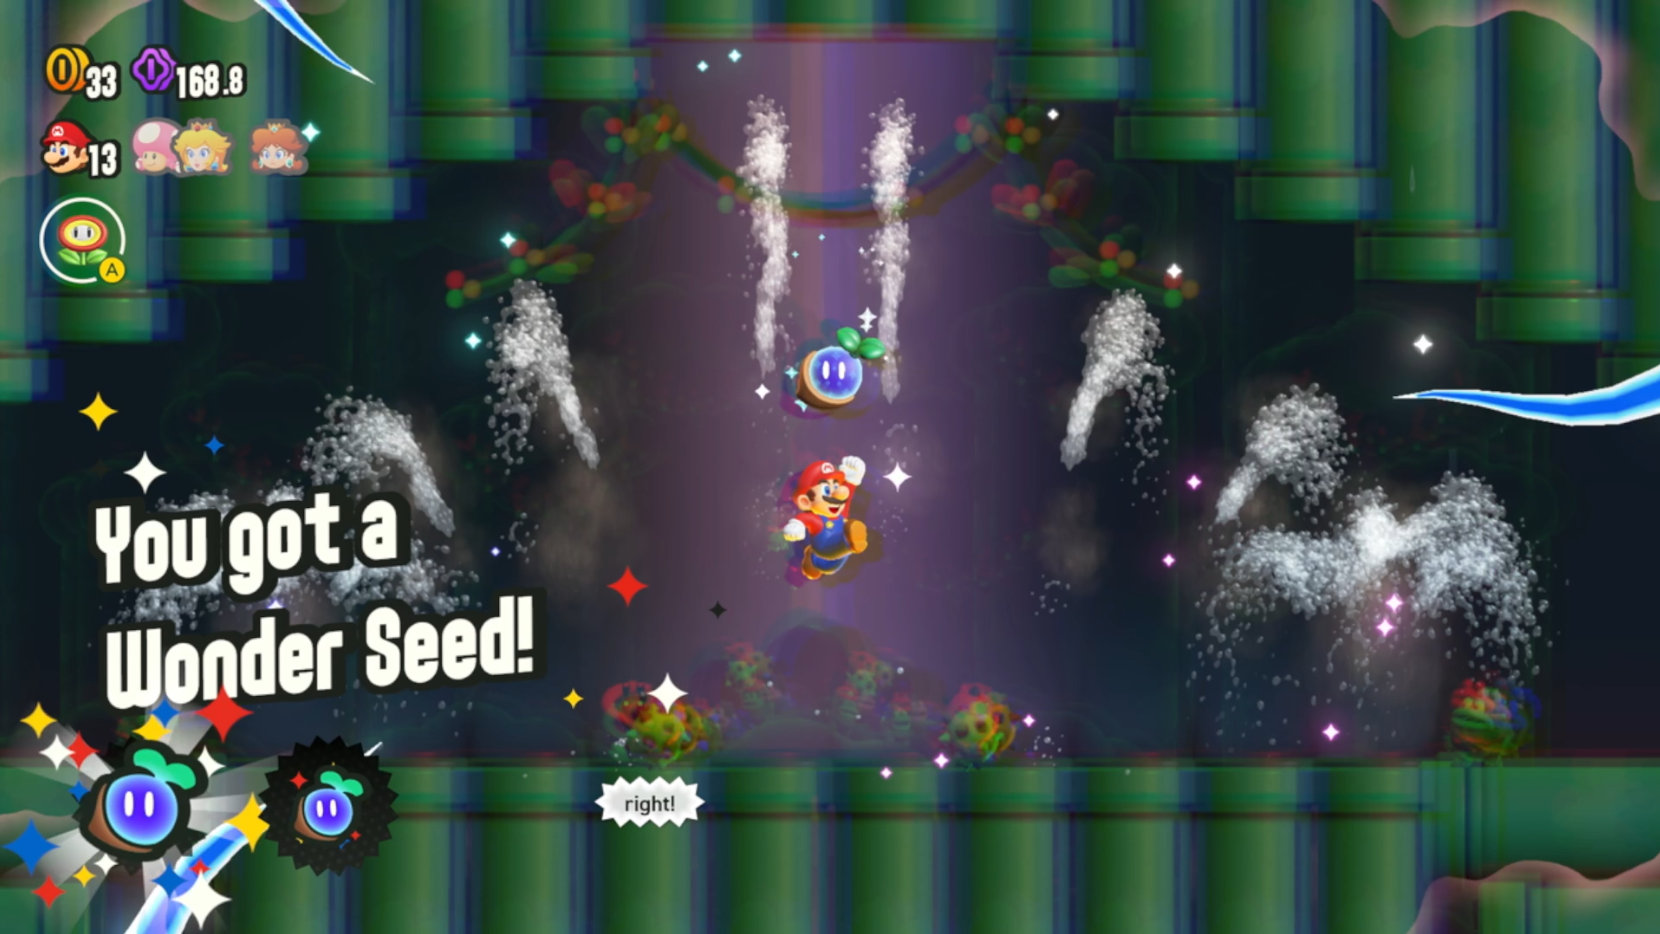 Mario collects a Wonder Seed, jumping into the air and causing confetti to go off.